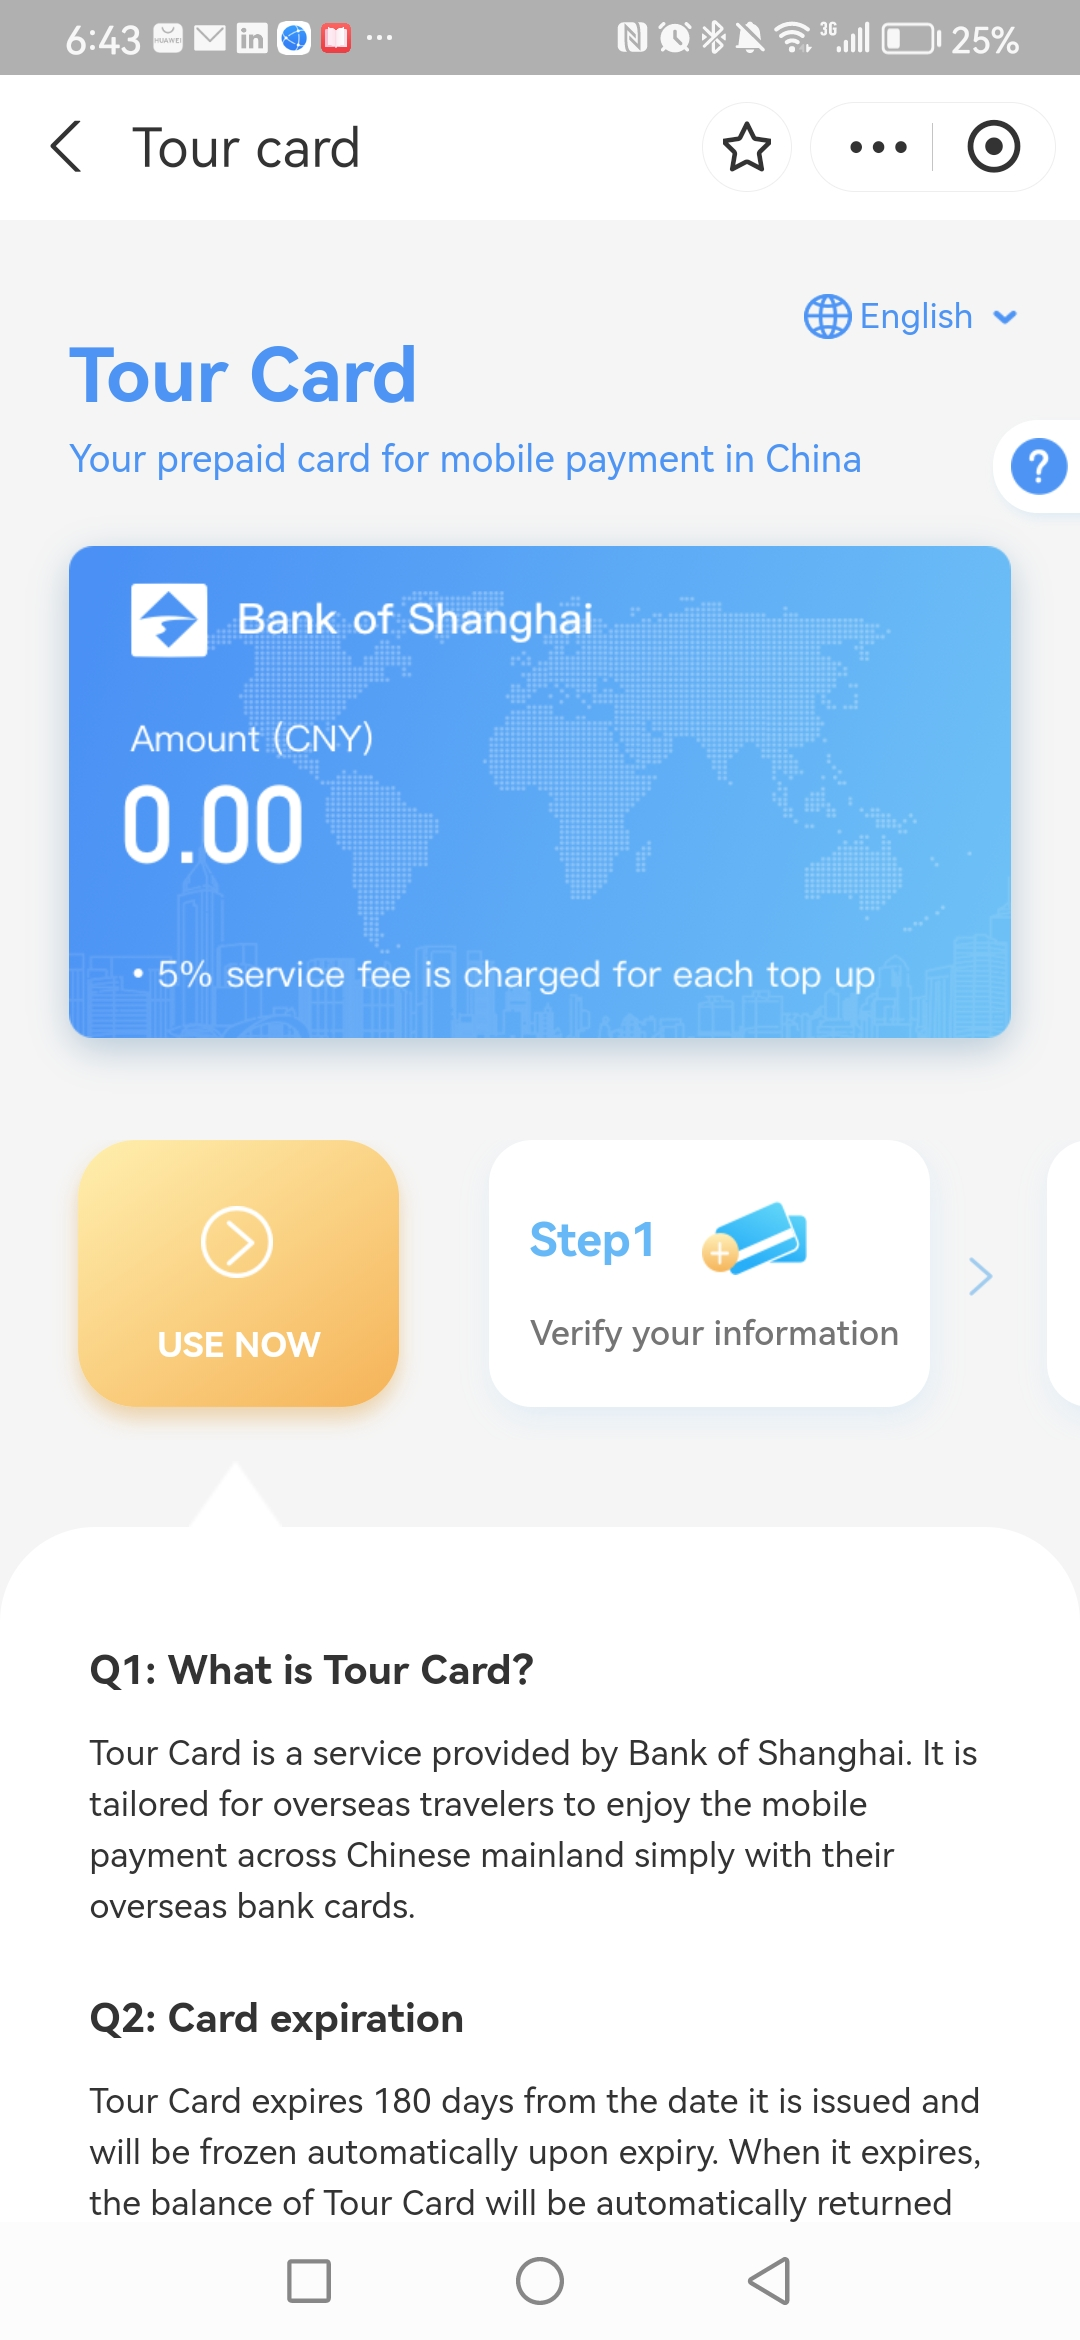 how to verify information on Tour Card Alipay